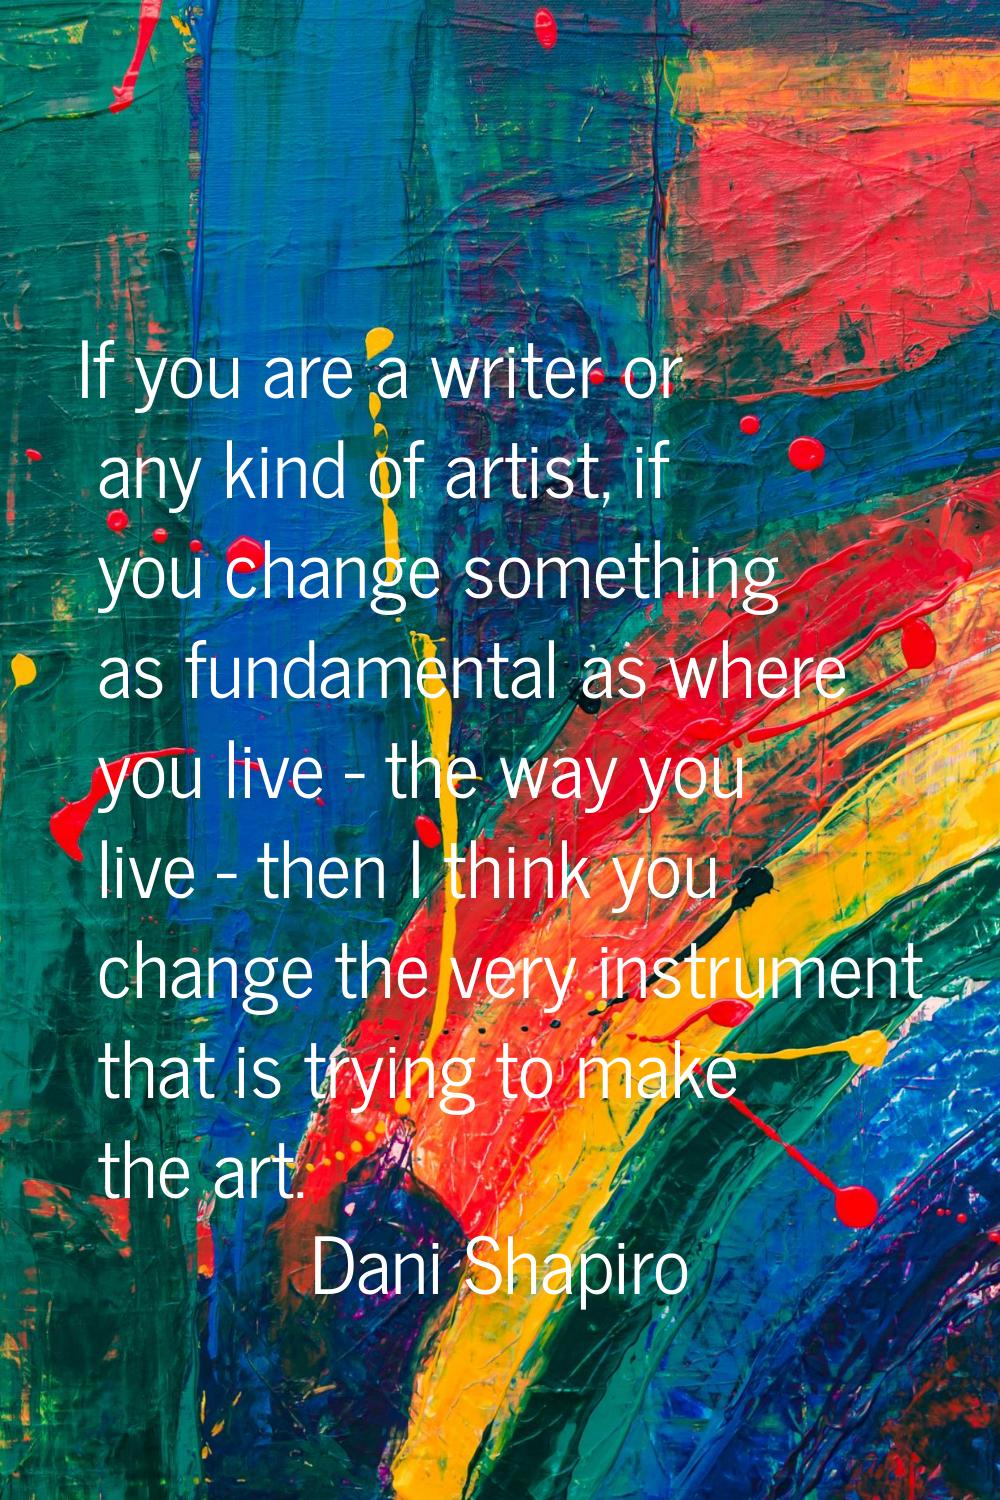 If you are a writer or any kind of artist, if you change something as fundamental as where you live